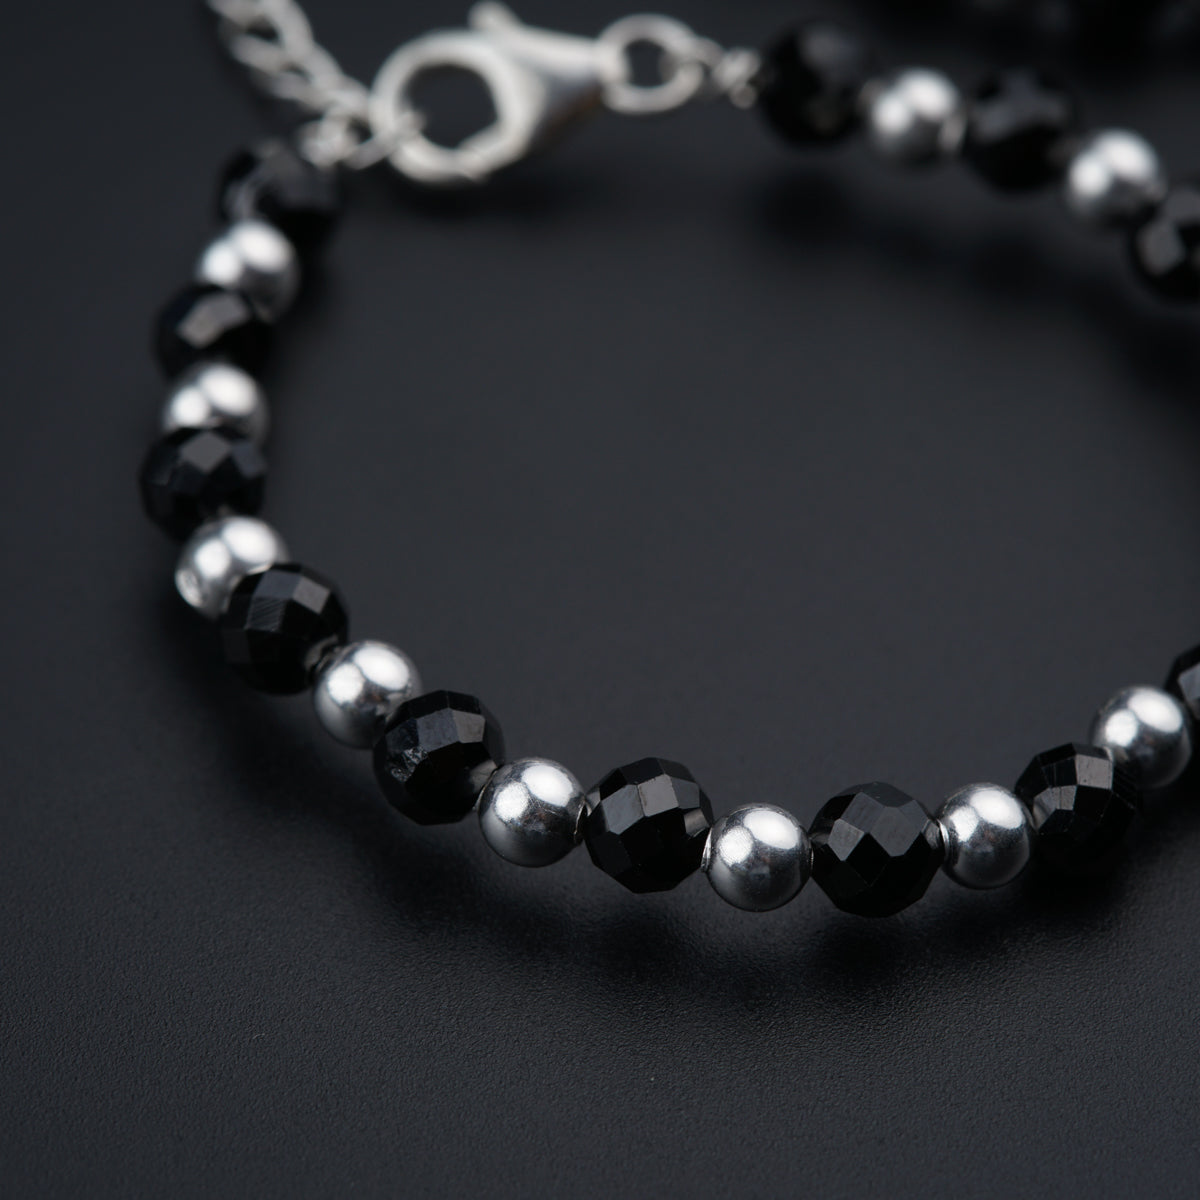 a black and silver beaded bracelet on a black surface